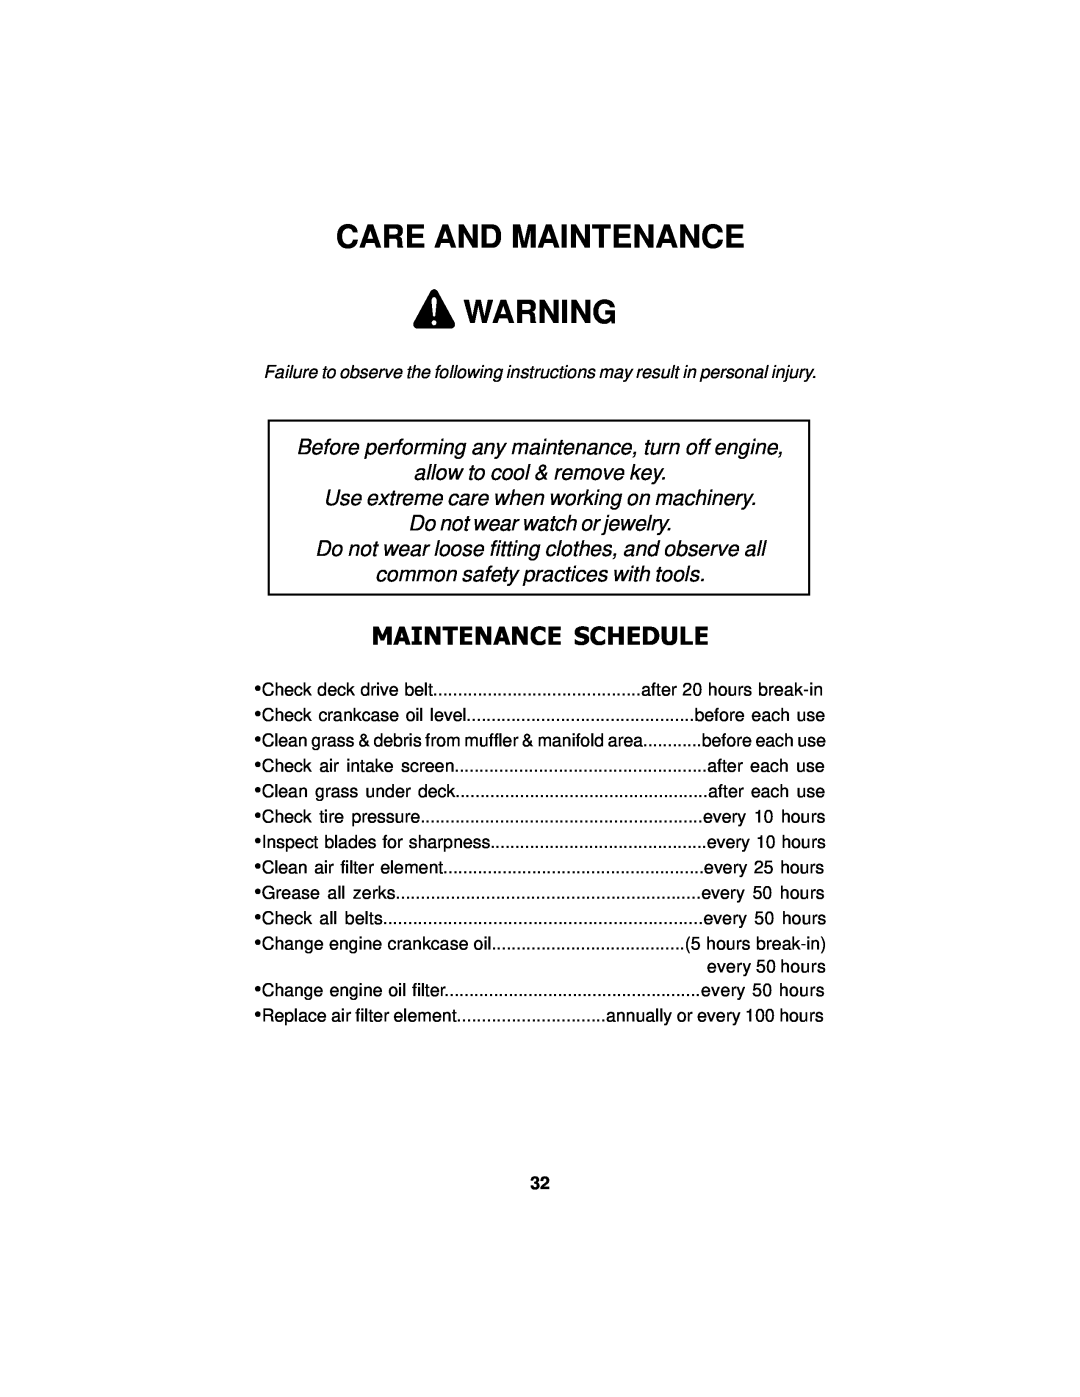 Dixon 14295-0804 manual Care And Maintenance, Maintenance Schedule, Before performing any maintenance, turn off engine 